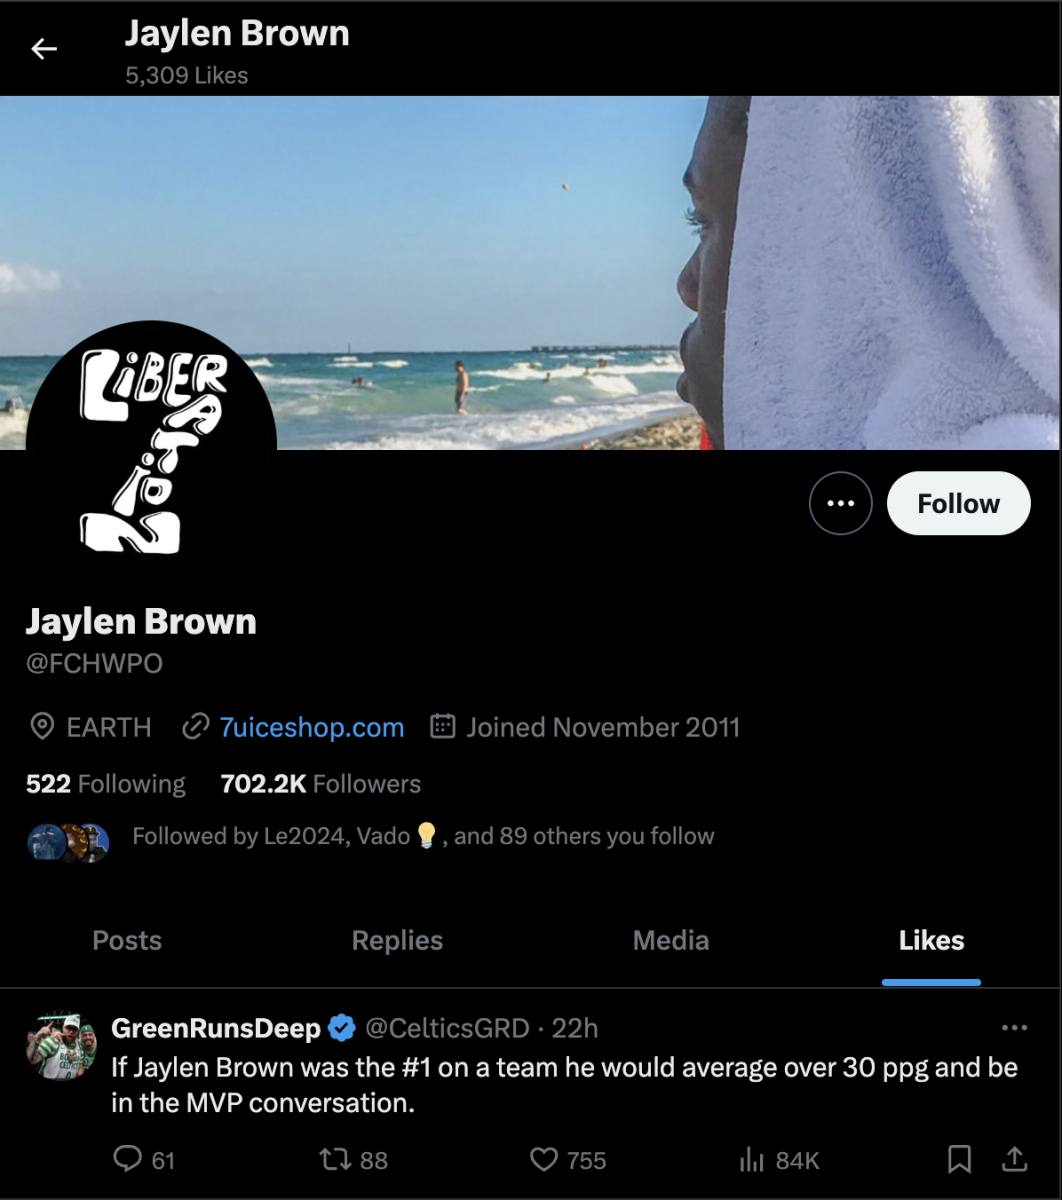 Jaylen Brown Likes A Tweet That Could Destroy His Partnership With Jayson Tatum